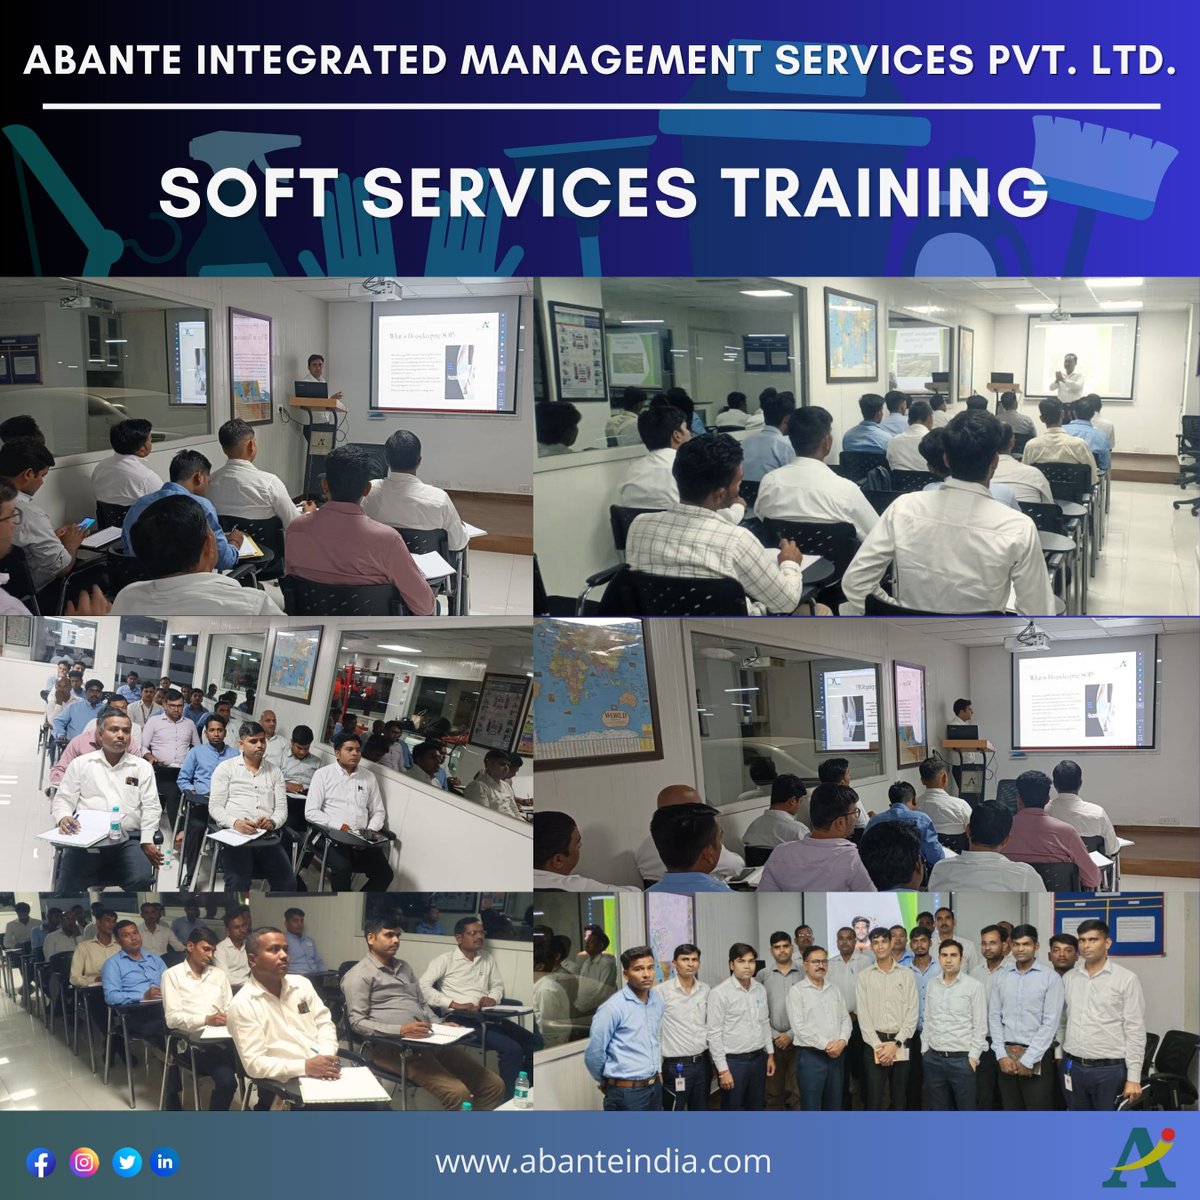 Soft Services training enhance the confidence to communicate with clients, resolve challenges and increased productivity at work.

soft services team Training conducted by Dr. KP Singh & Mr. Mahipal Singh.

#abanteintegrated #managementservices #team #work #training #productivity